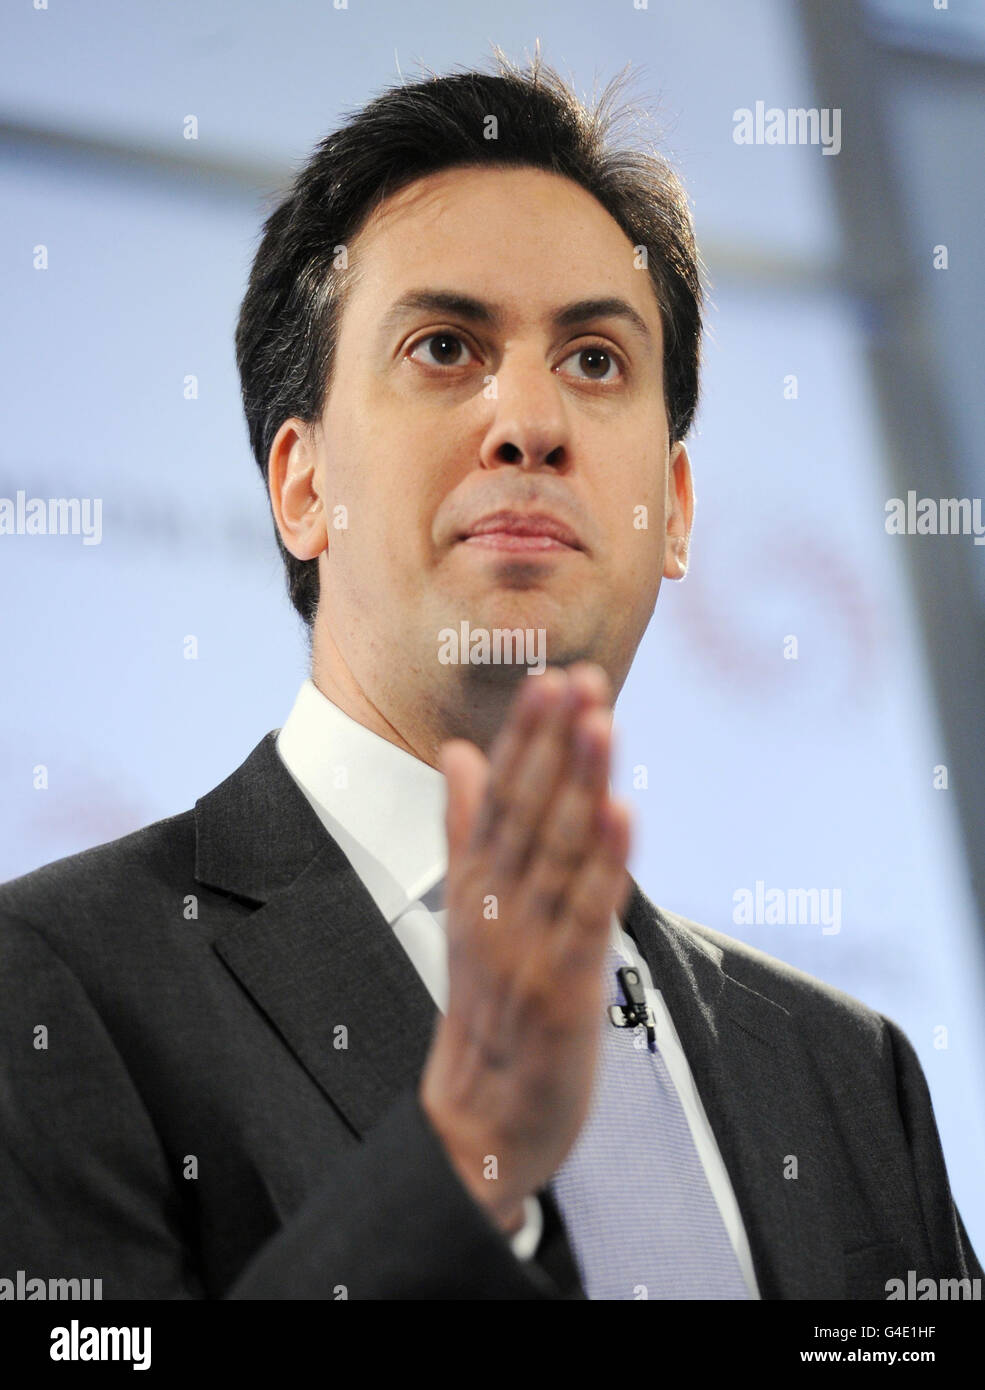 Labour party leader Ed Miliband makes a speech at the Thomson Reuters Building, London. Stock Photo